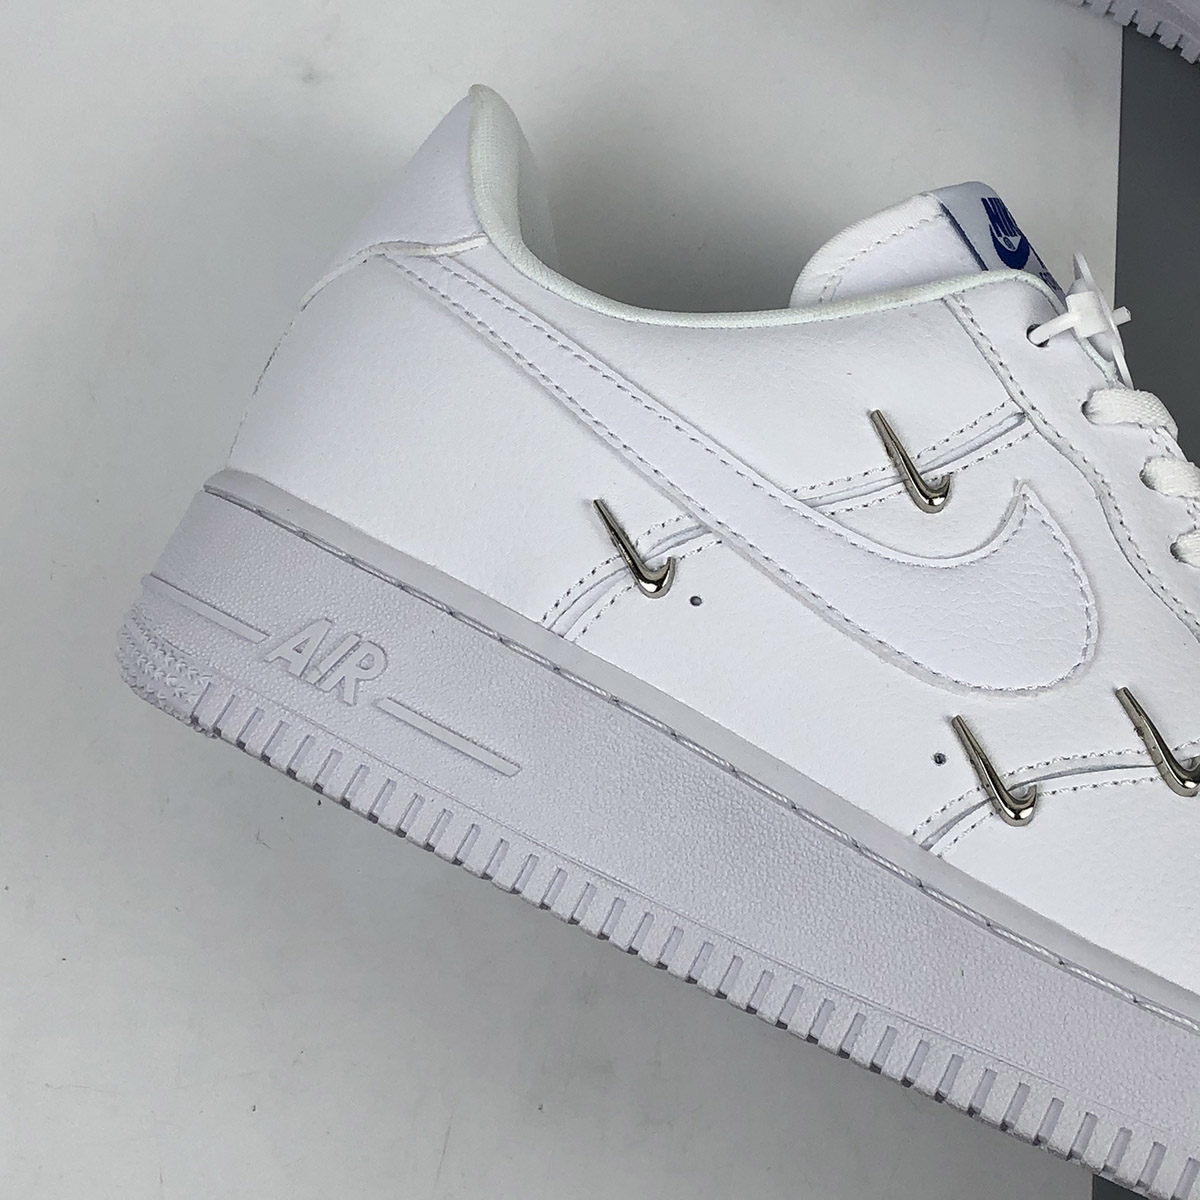 Nike Air Force 1 LX White/Hyper Royal-Black For Sale – The Sole Line